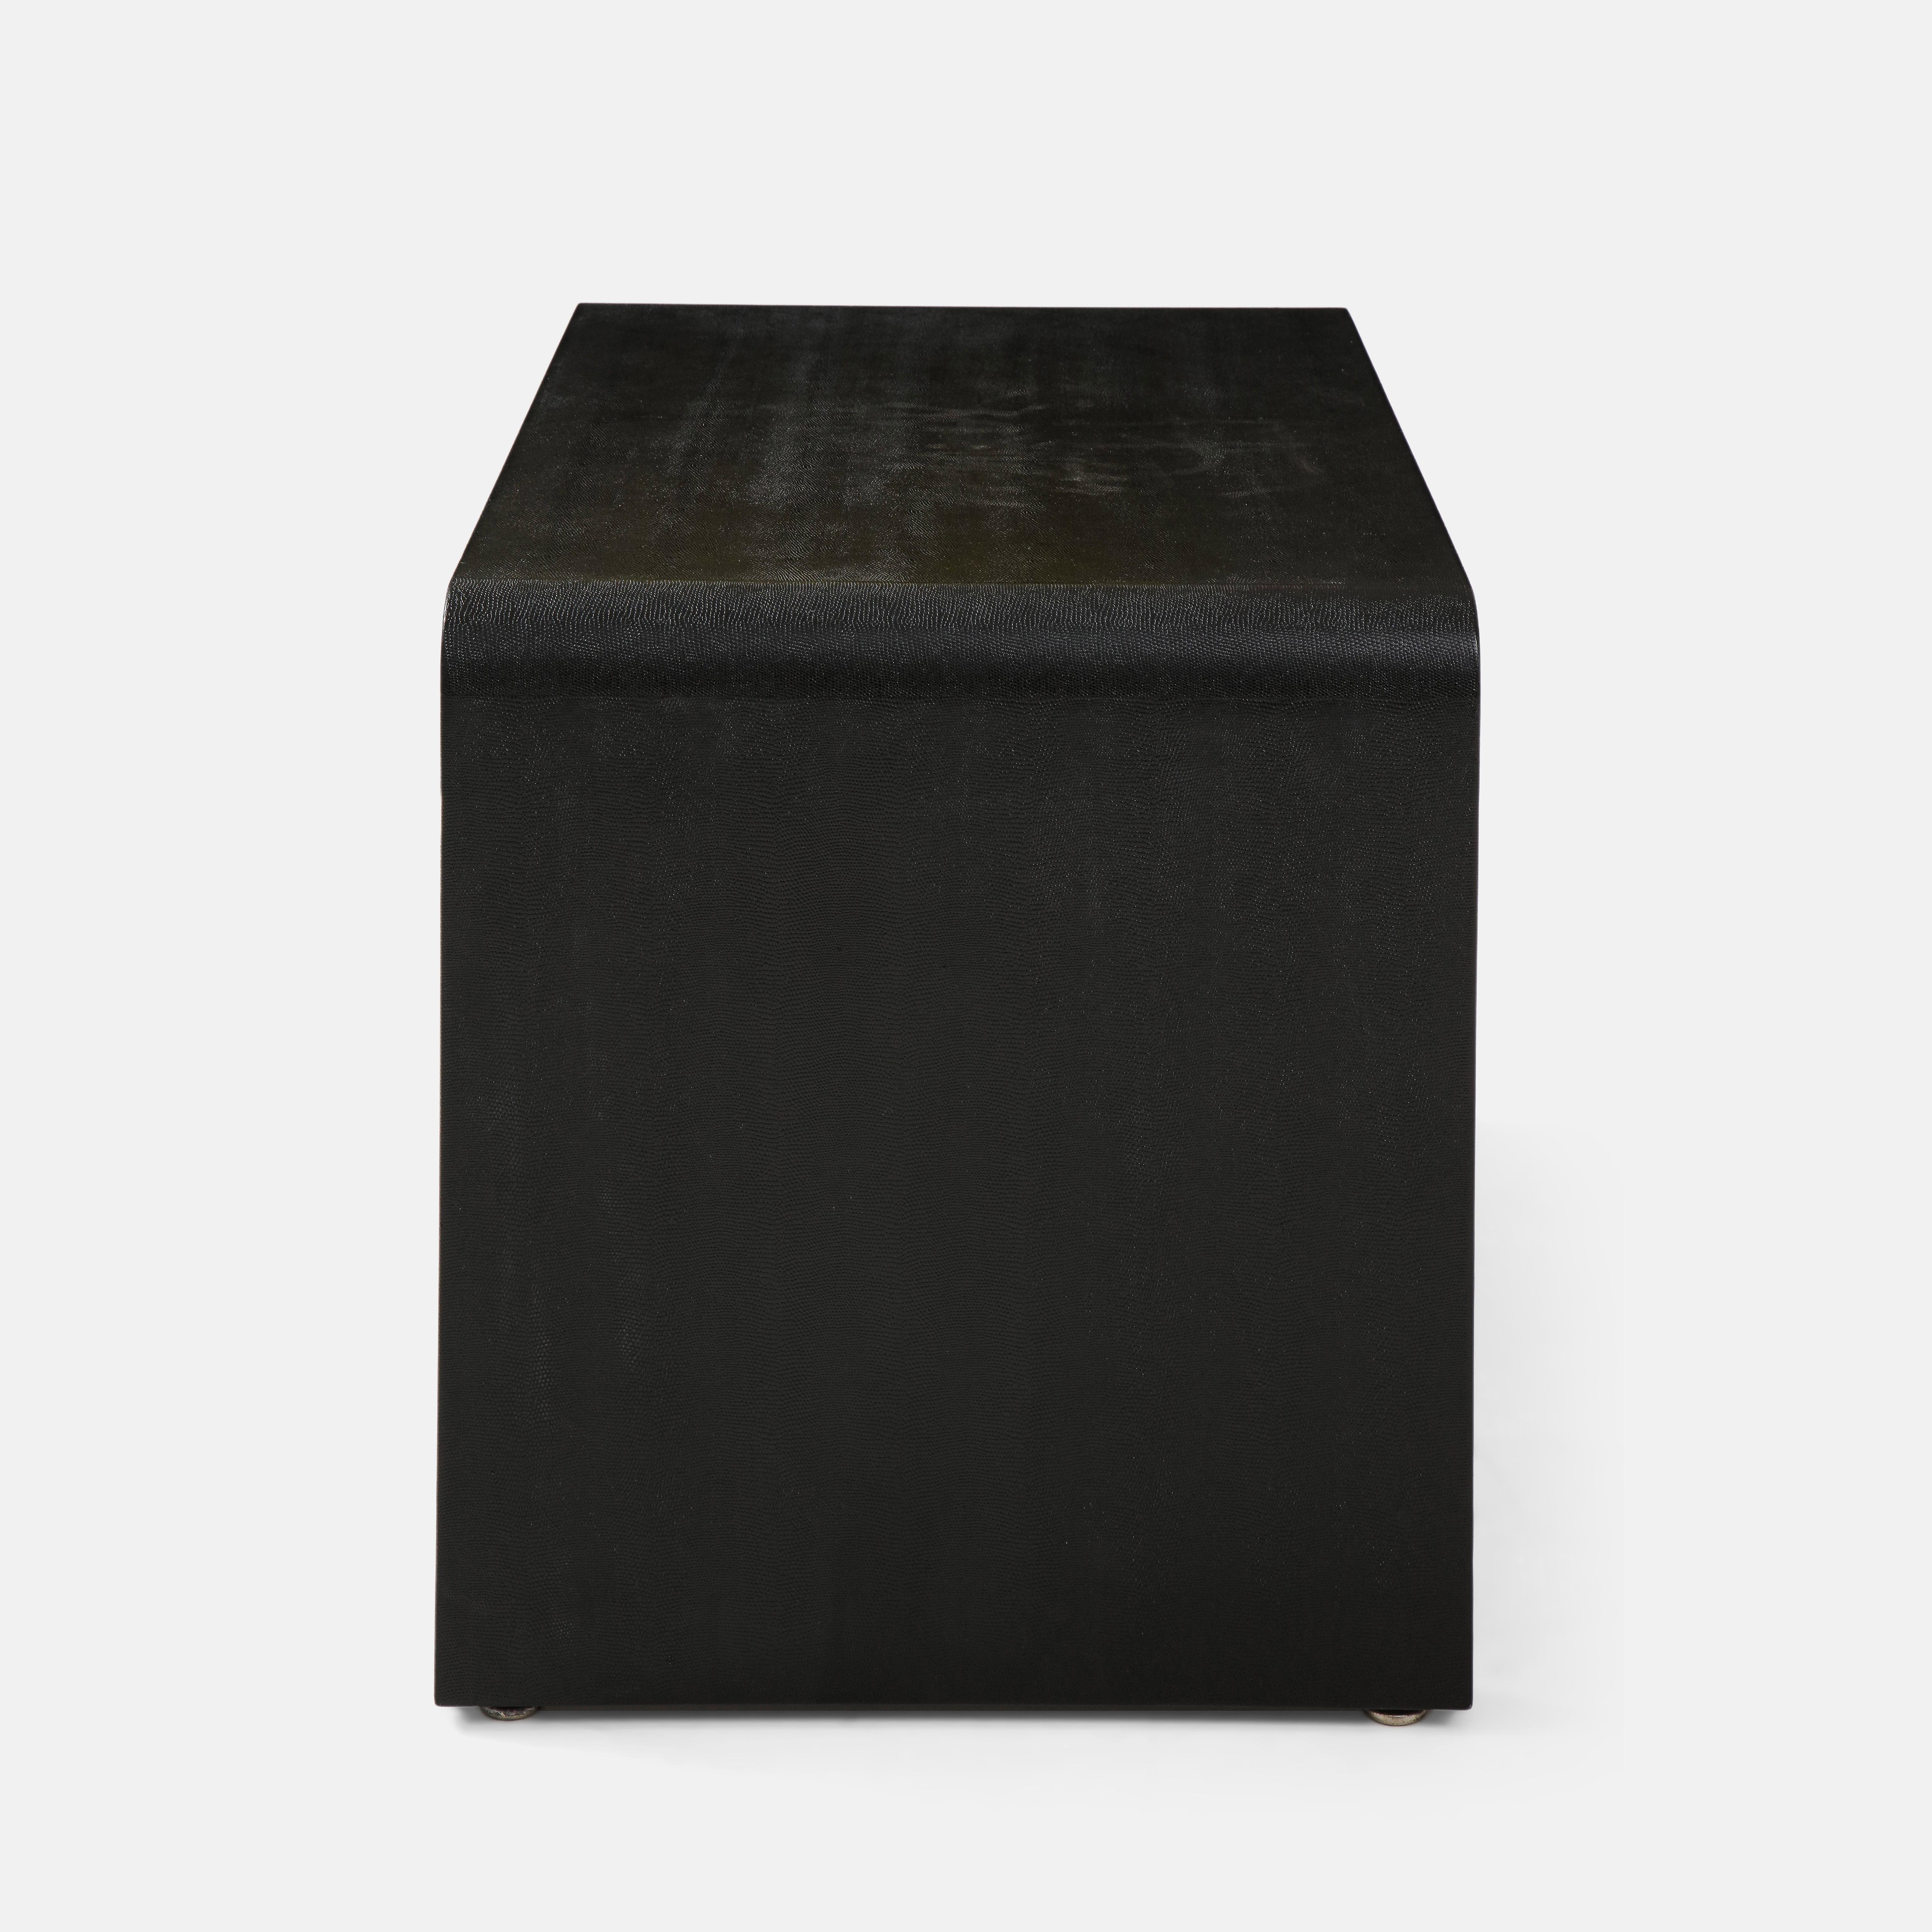 Karl Springer Rare Pair of Large Waterfall Side Tables in Black Lizard Leather In Good Condition For Sale In New York, NY